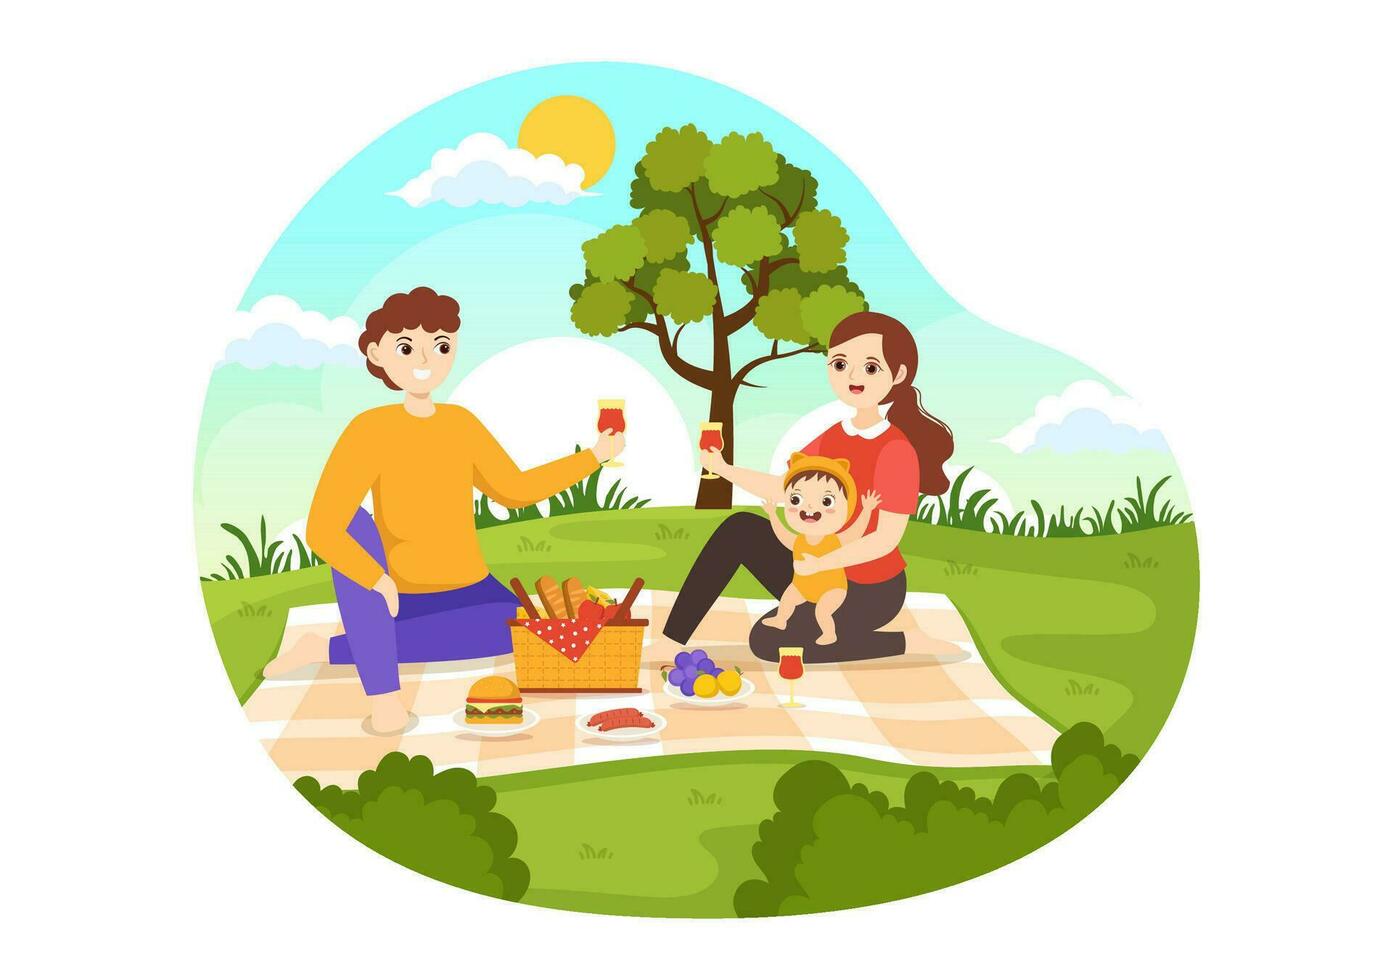 Picnic Outdoors Vector Illustration of Kids Sitting on a Green Grass in Nature on Summer Holiday Vacations in Cartoon Hand Drawn Templates